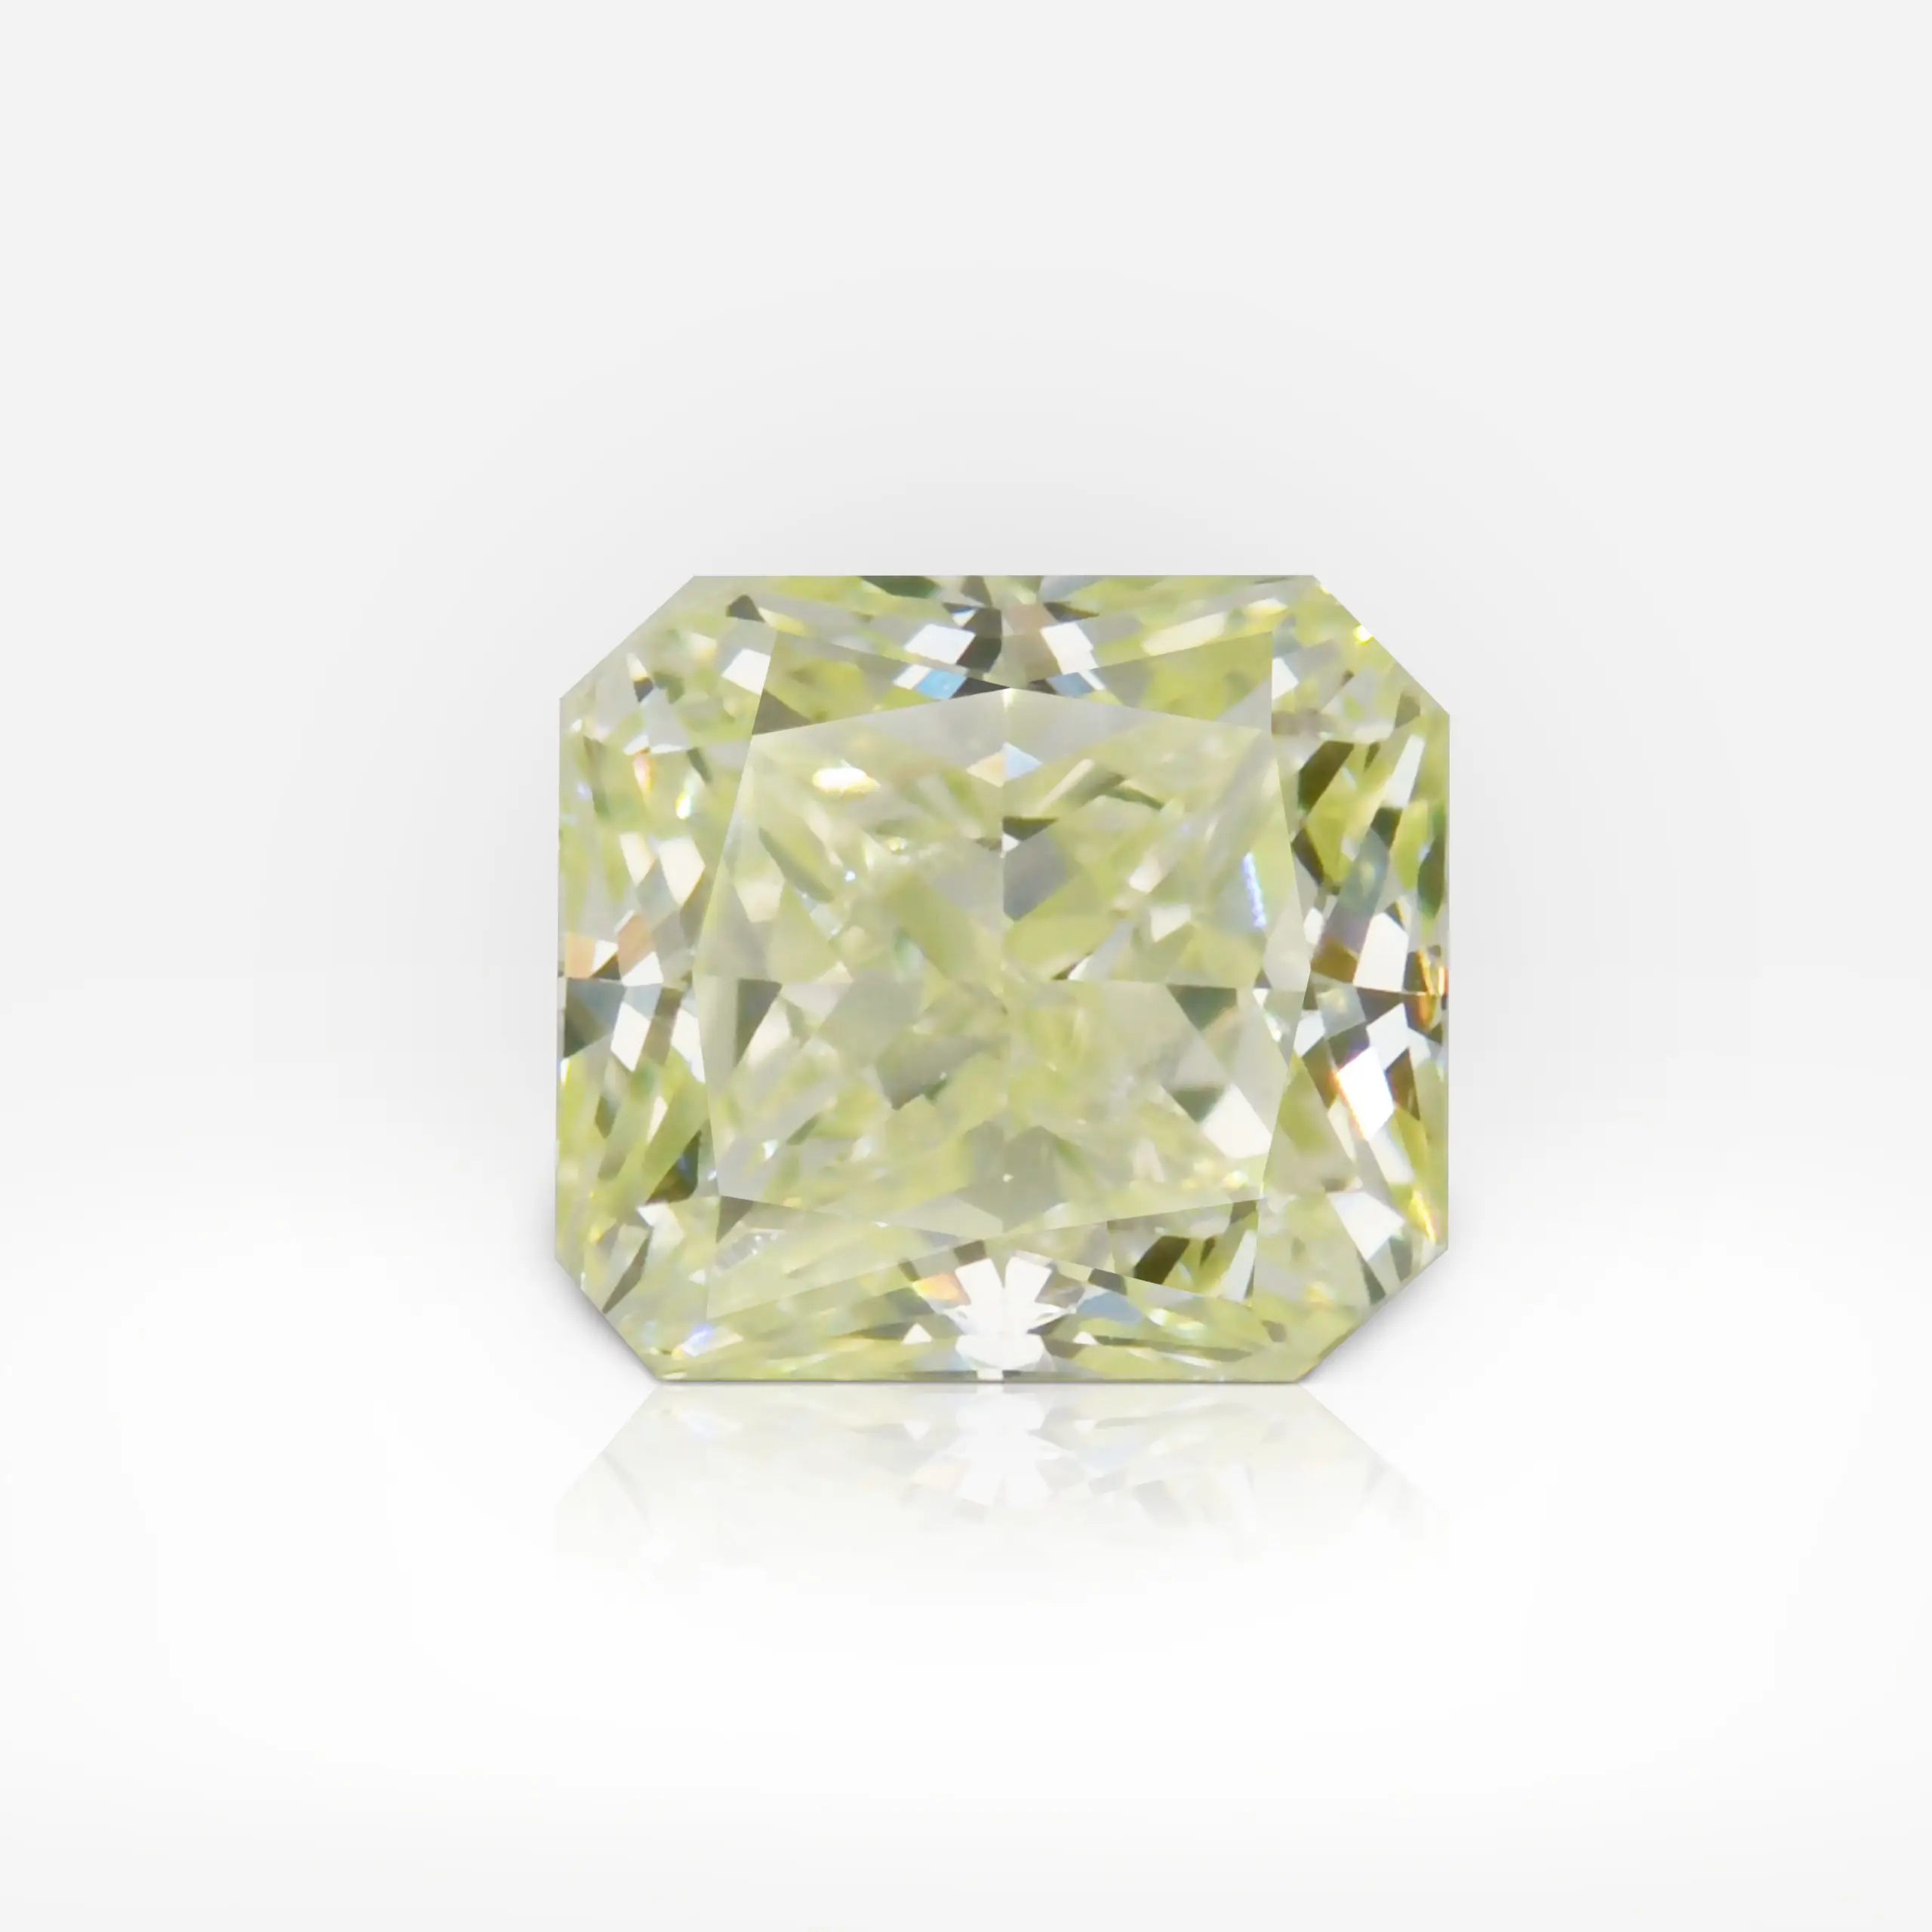 0.47 carat Fancy Green Yellow SI1 Radiant Shape Diamond GIA - picture 1